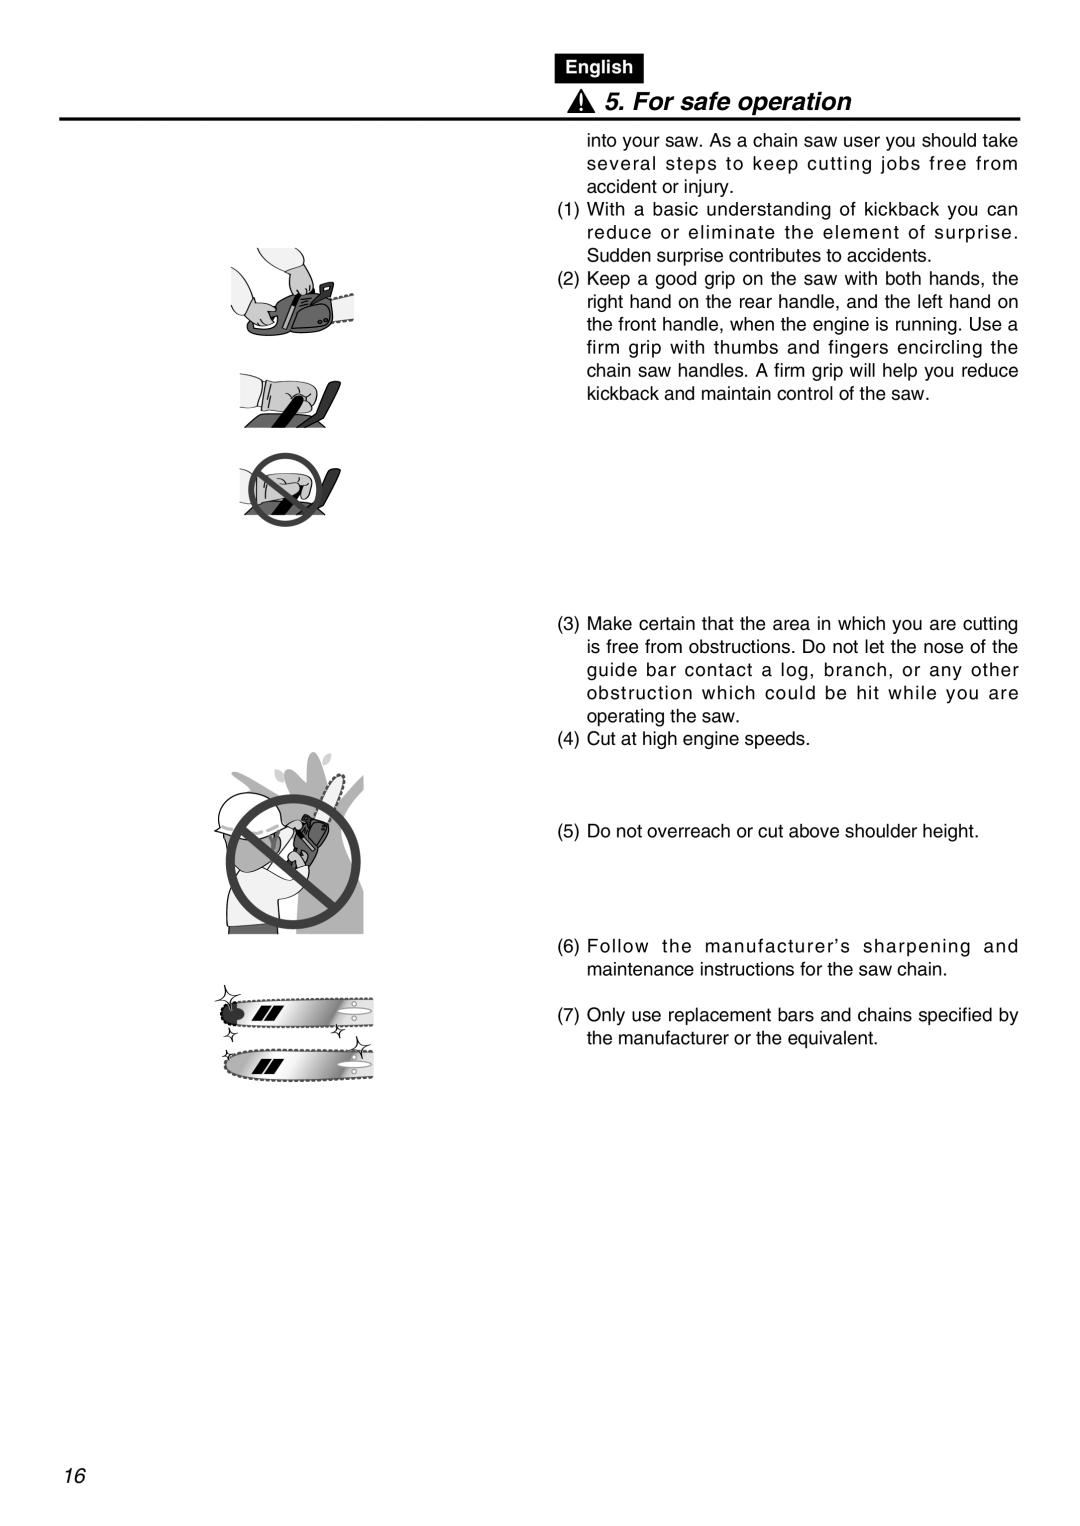 RedMax G5000AVS manual For safe operation, English, Cut at high engine speeds 